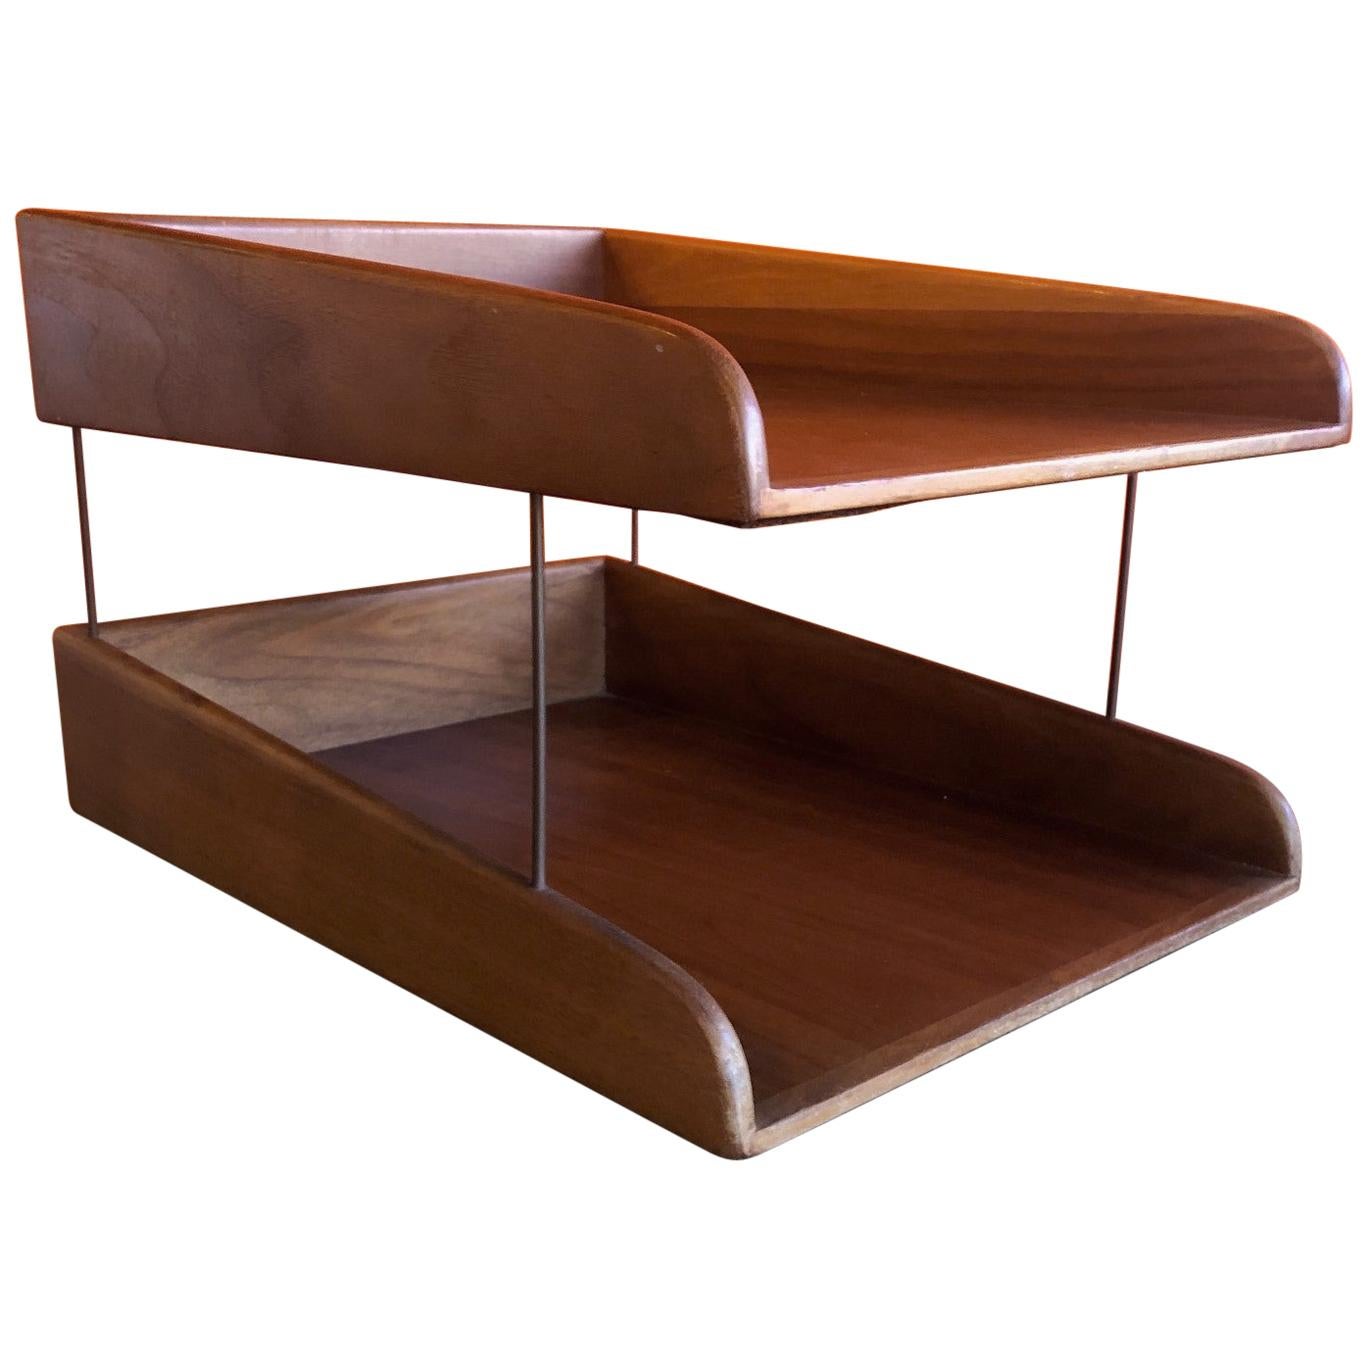 Midcentury Double Letter Tray in Walnut by Unicor